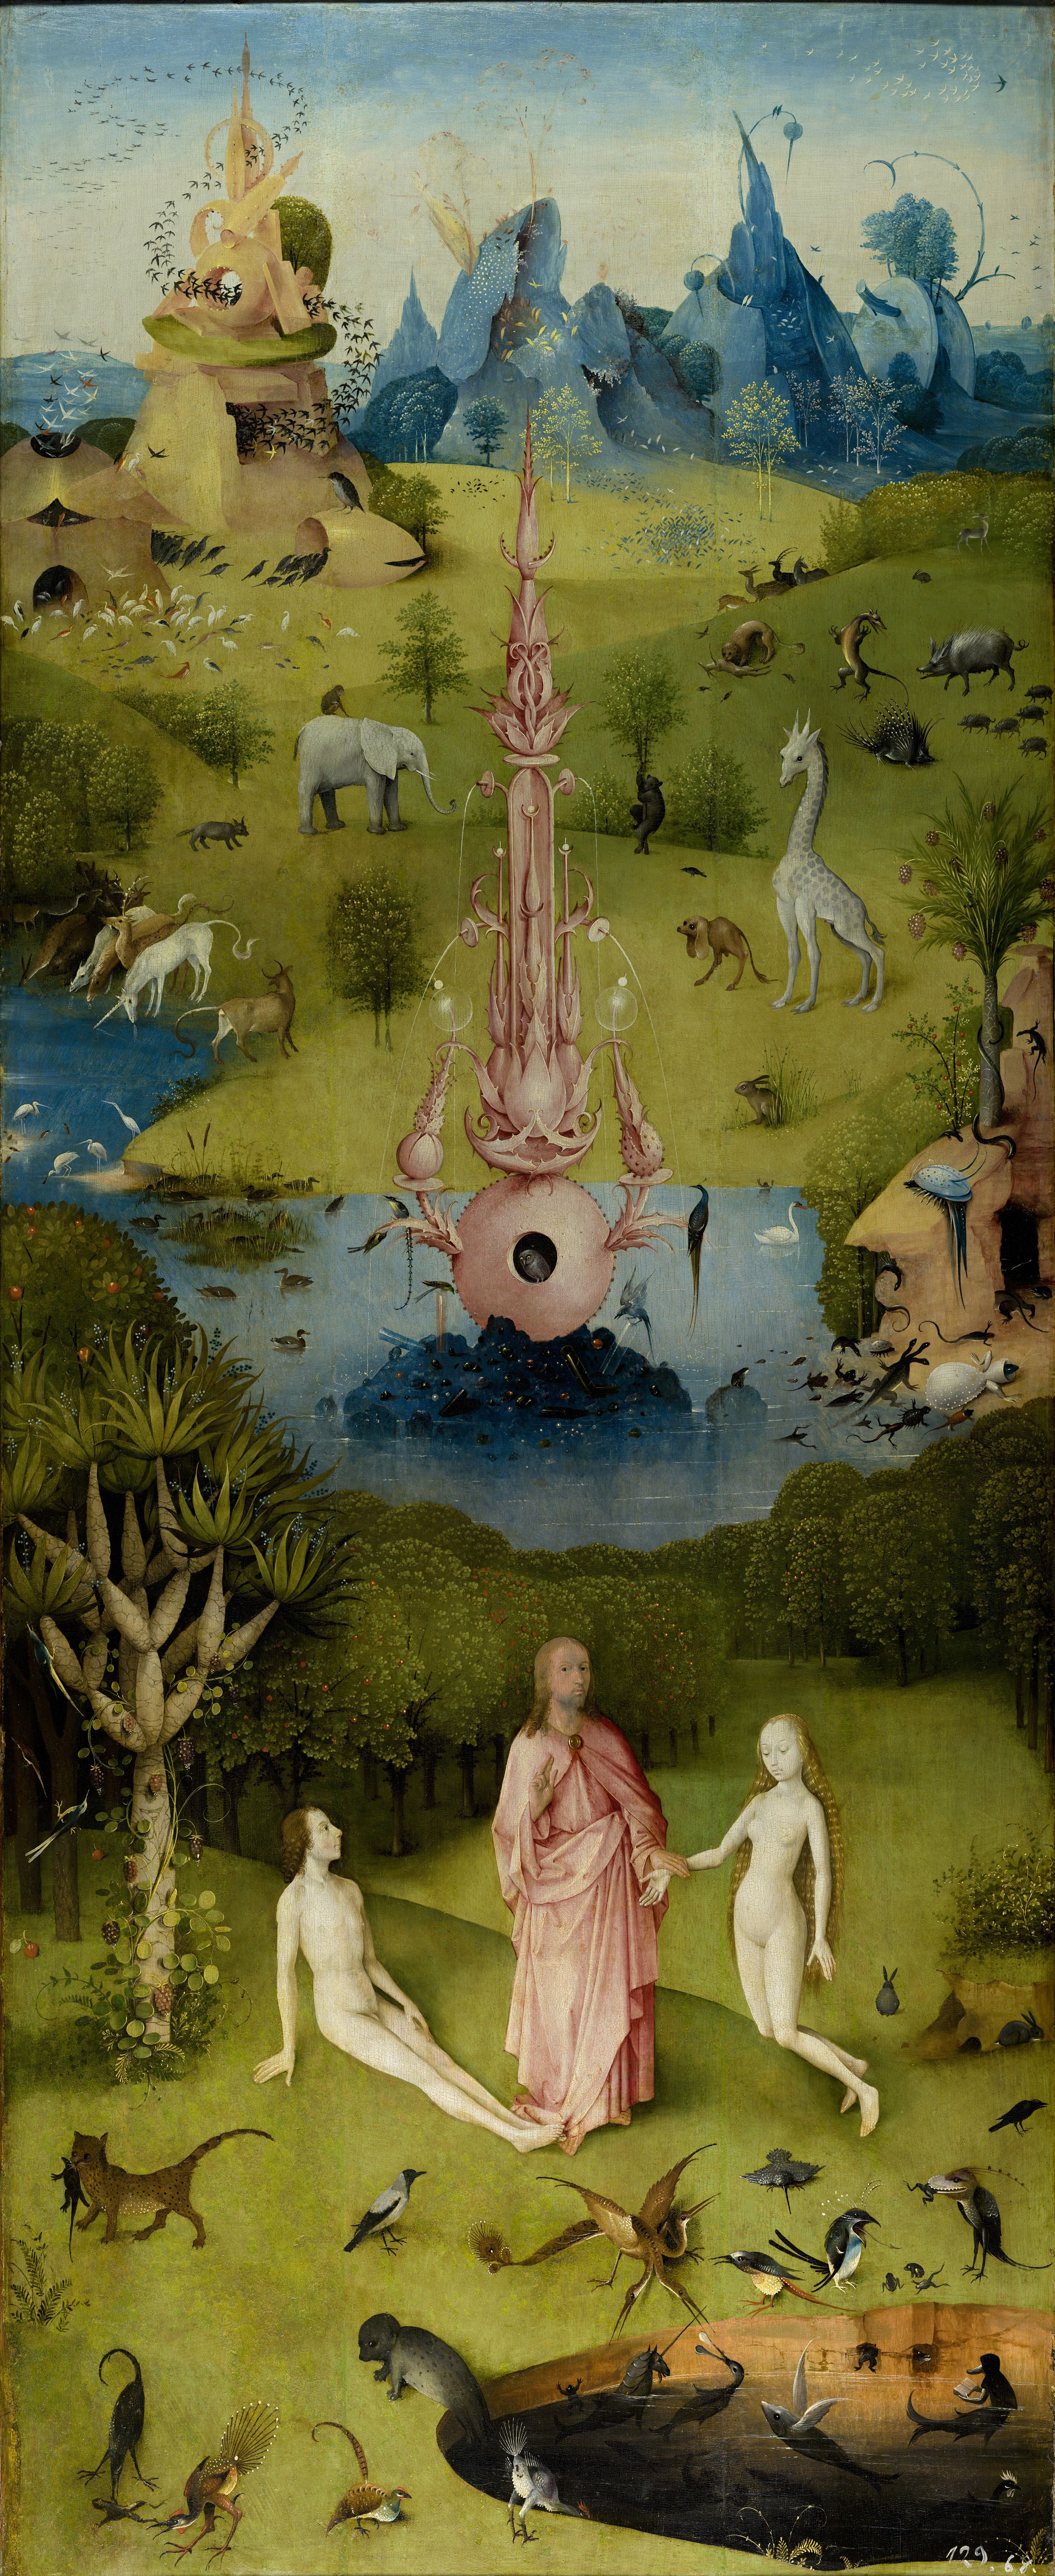 Hieronymus Bosch. The garden of earthly delights. Left wing